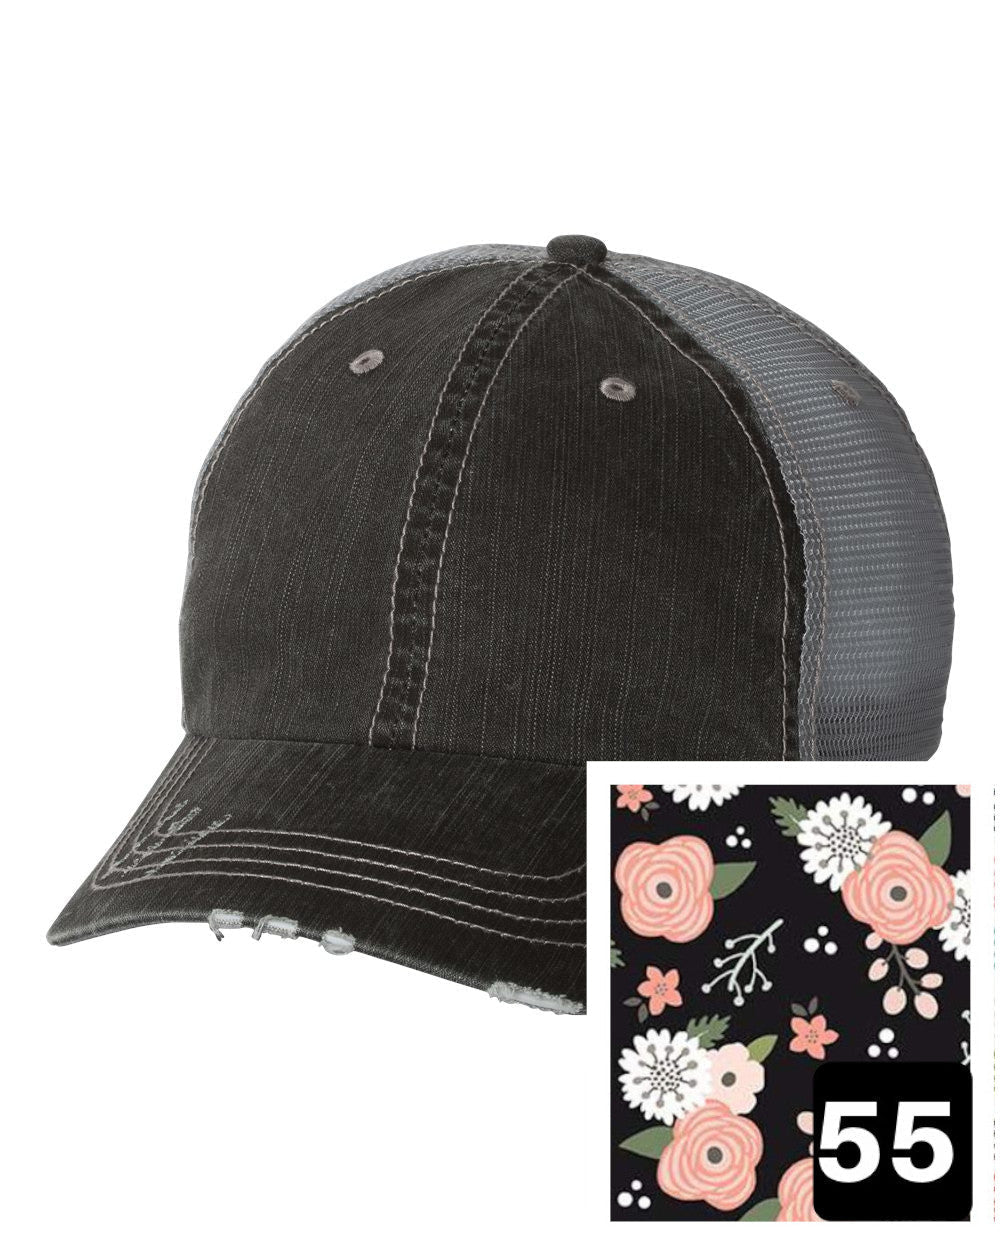 gray distressed trucker hat with petite floral on navy fabric state of Kentucky